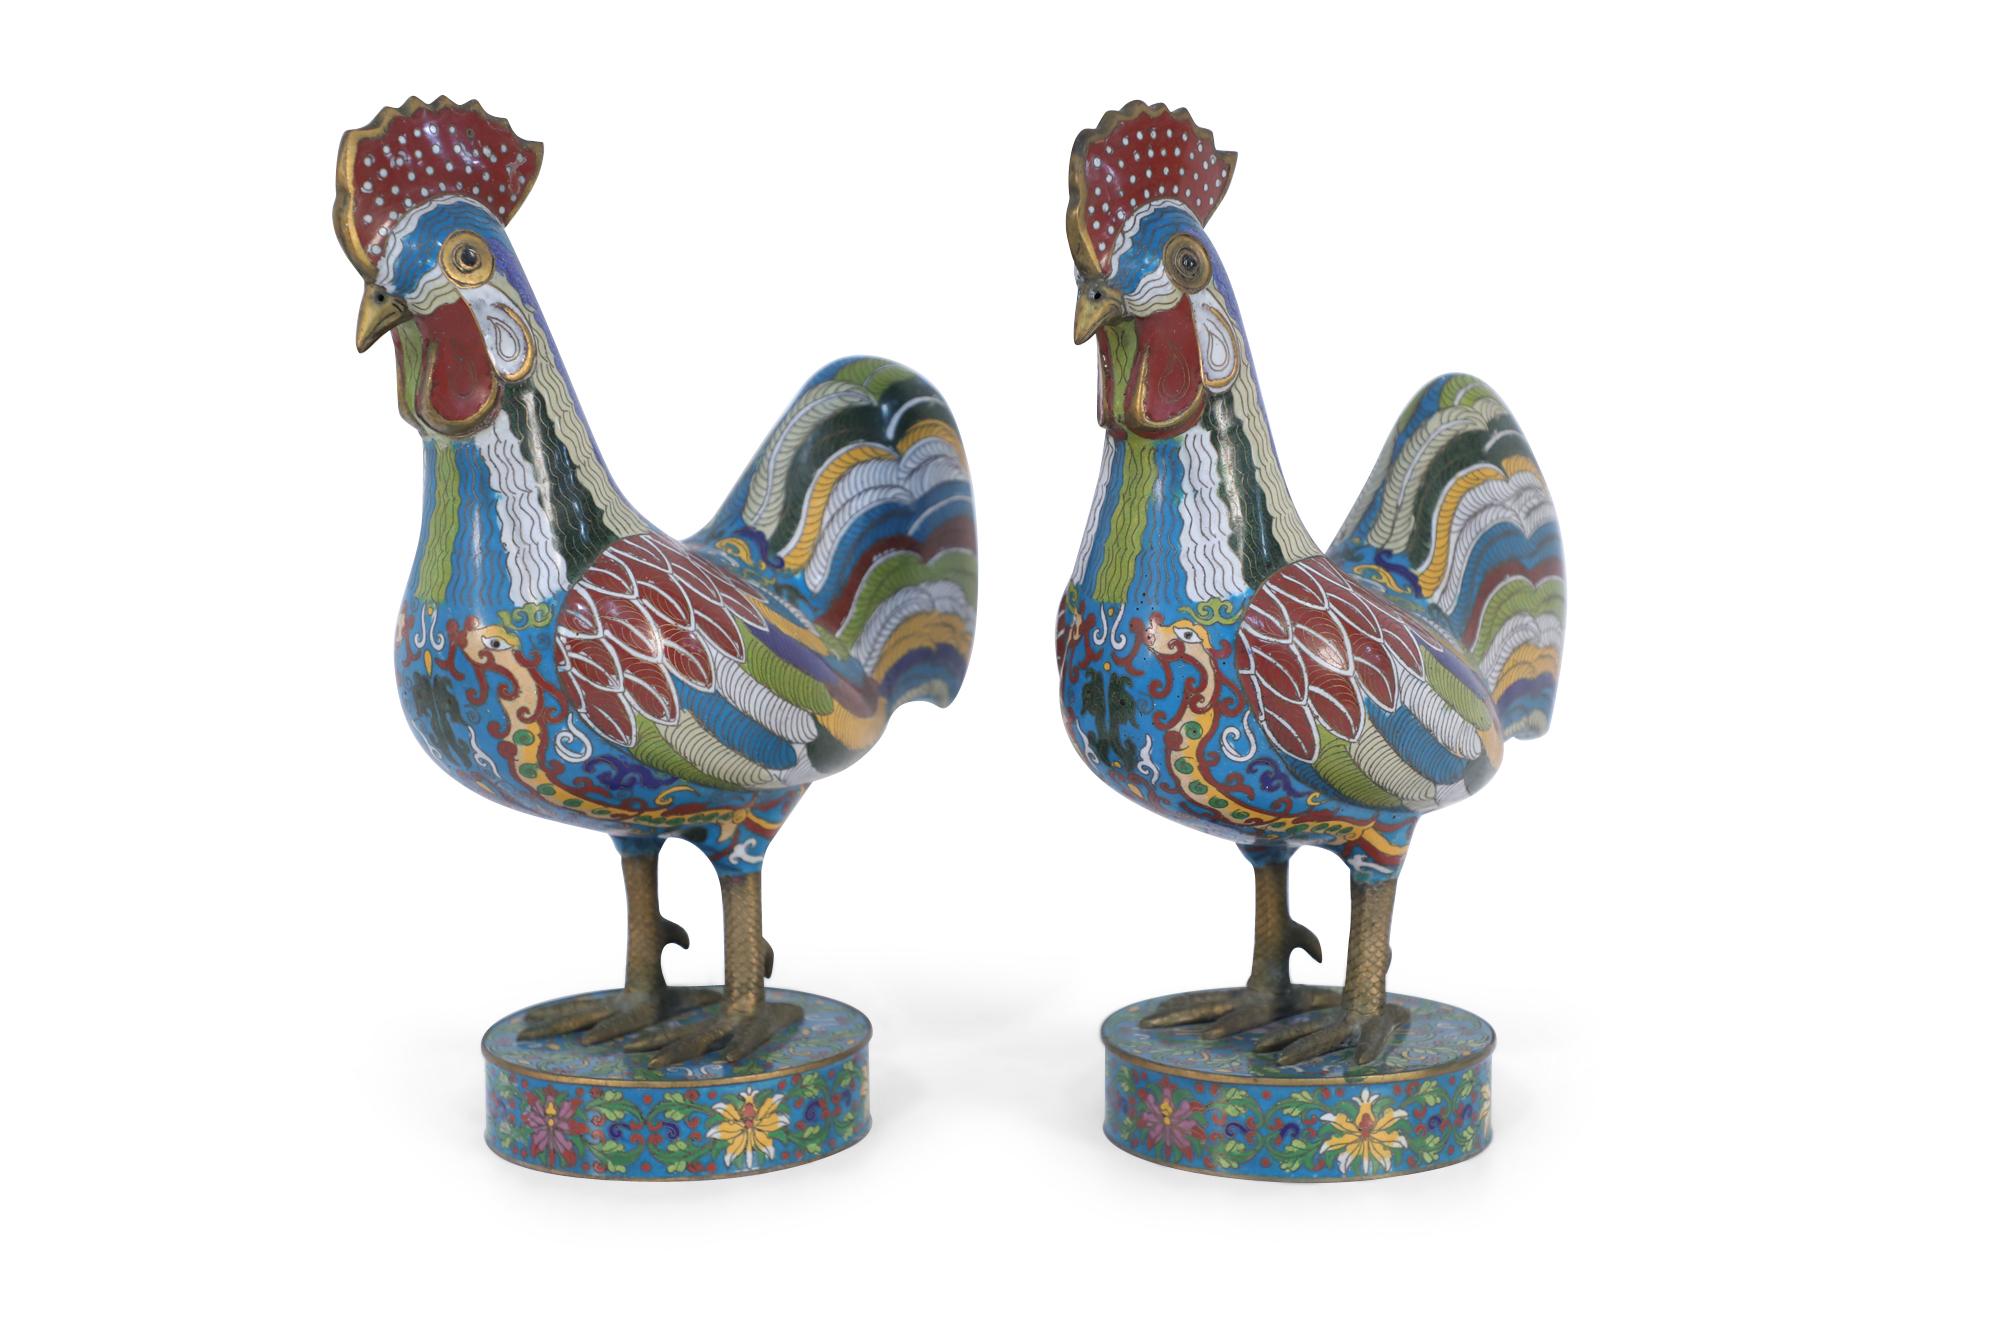 Chinese Export Pair of Early 20th Century Chinese Multi-Colored Cloisonne Rooster Sculptures For Sale